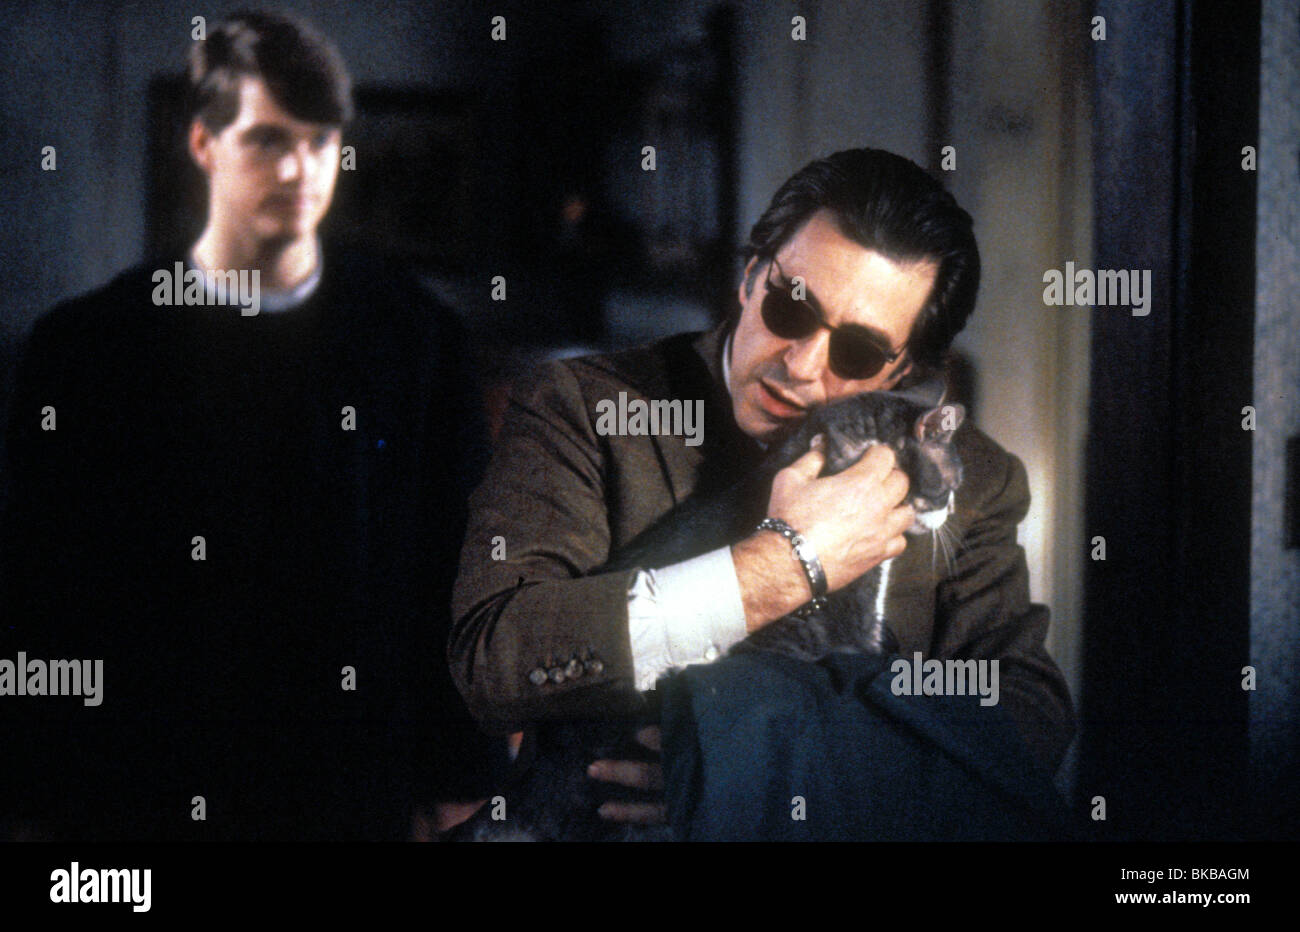 SCENT OF A WOMAN (1992) CHRIS O'DONNELL, AL PACINO SCW 081 Stock Photo